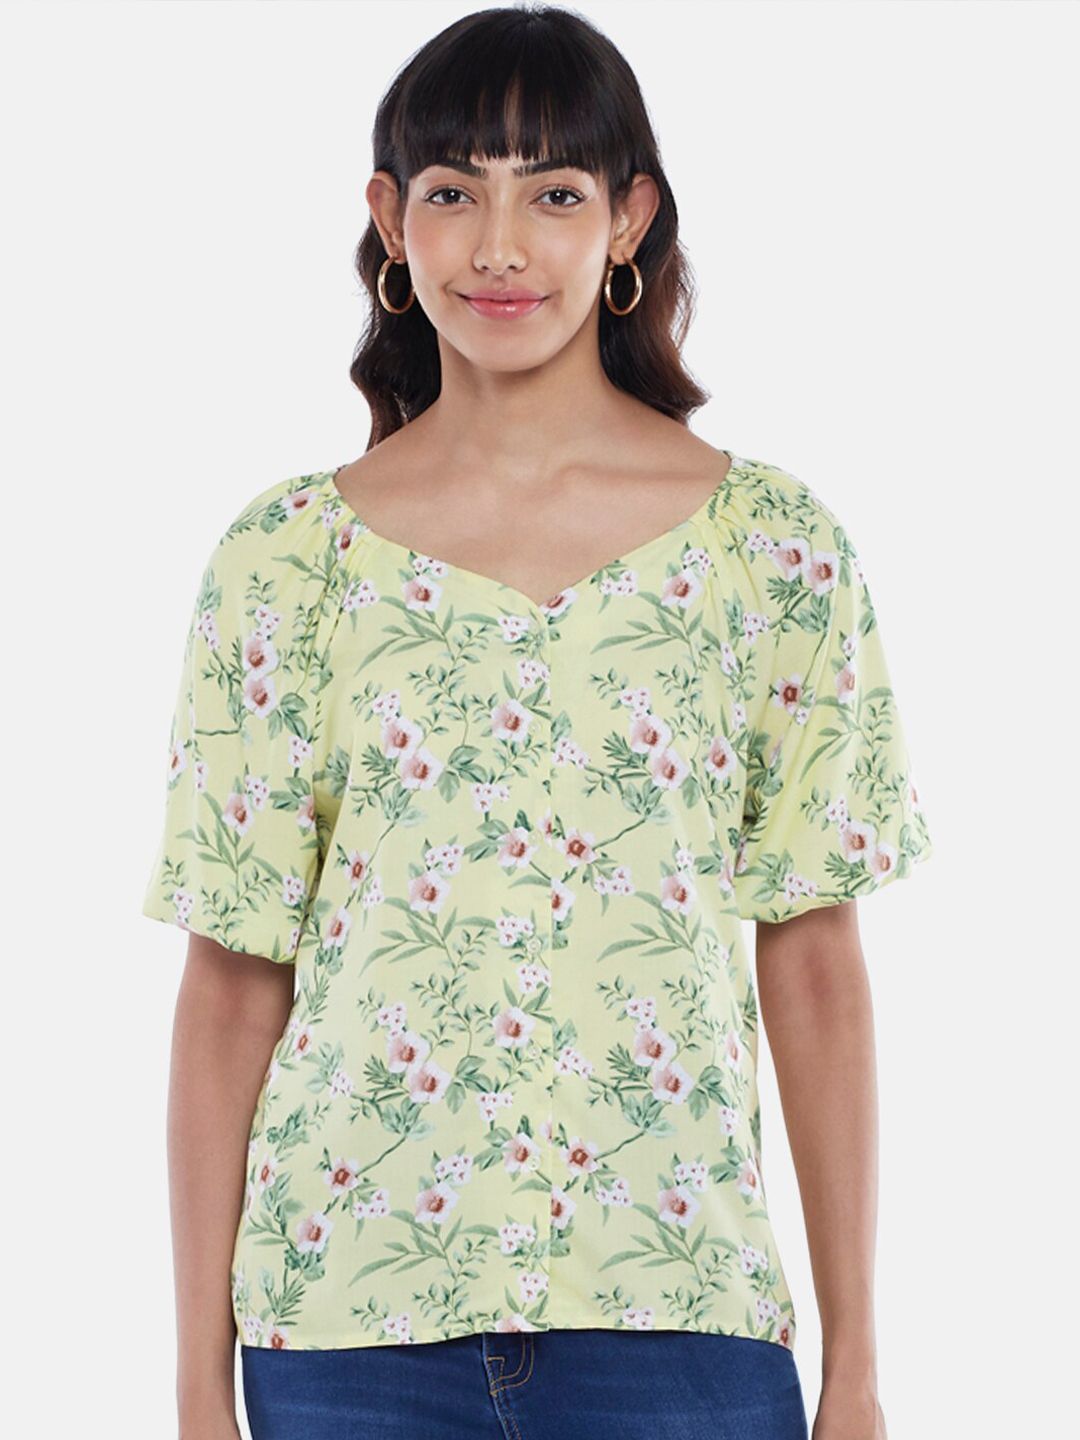 Honey by Pantaloons Yellow & asparagus green Floral Print Top Price in India